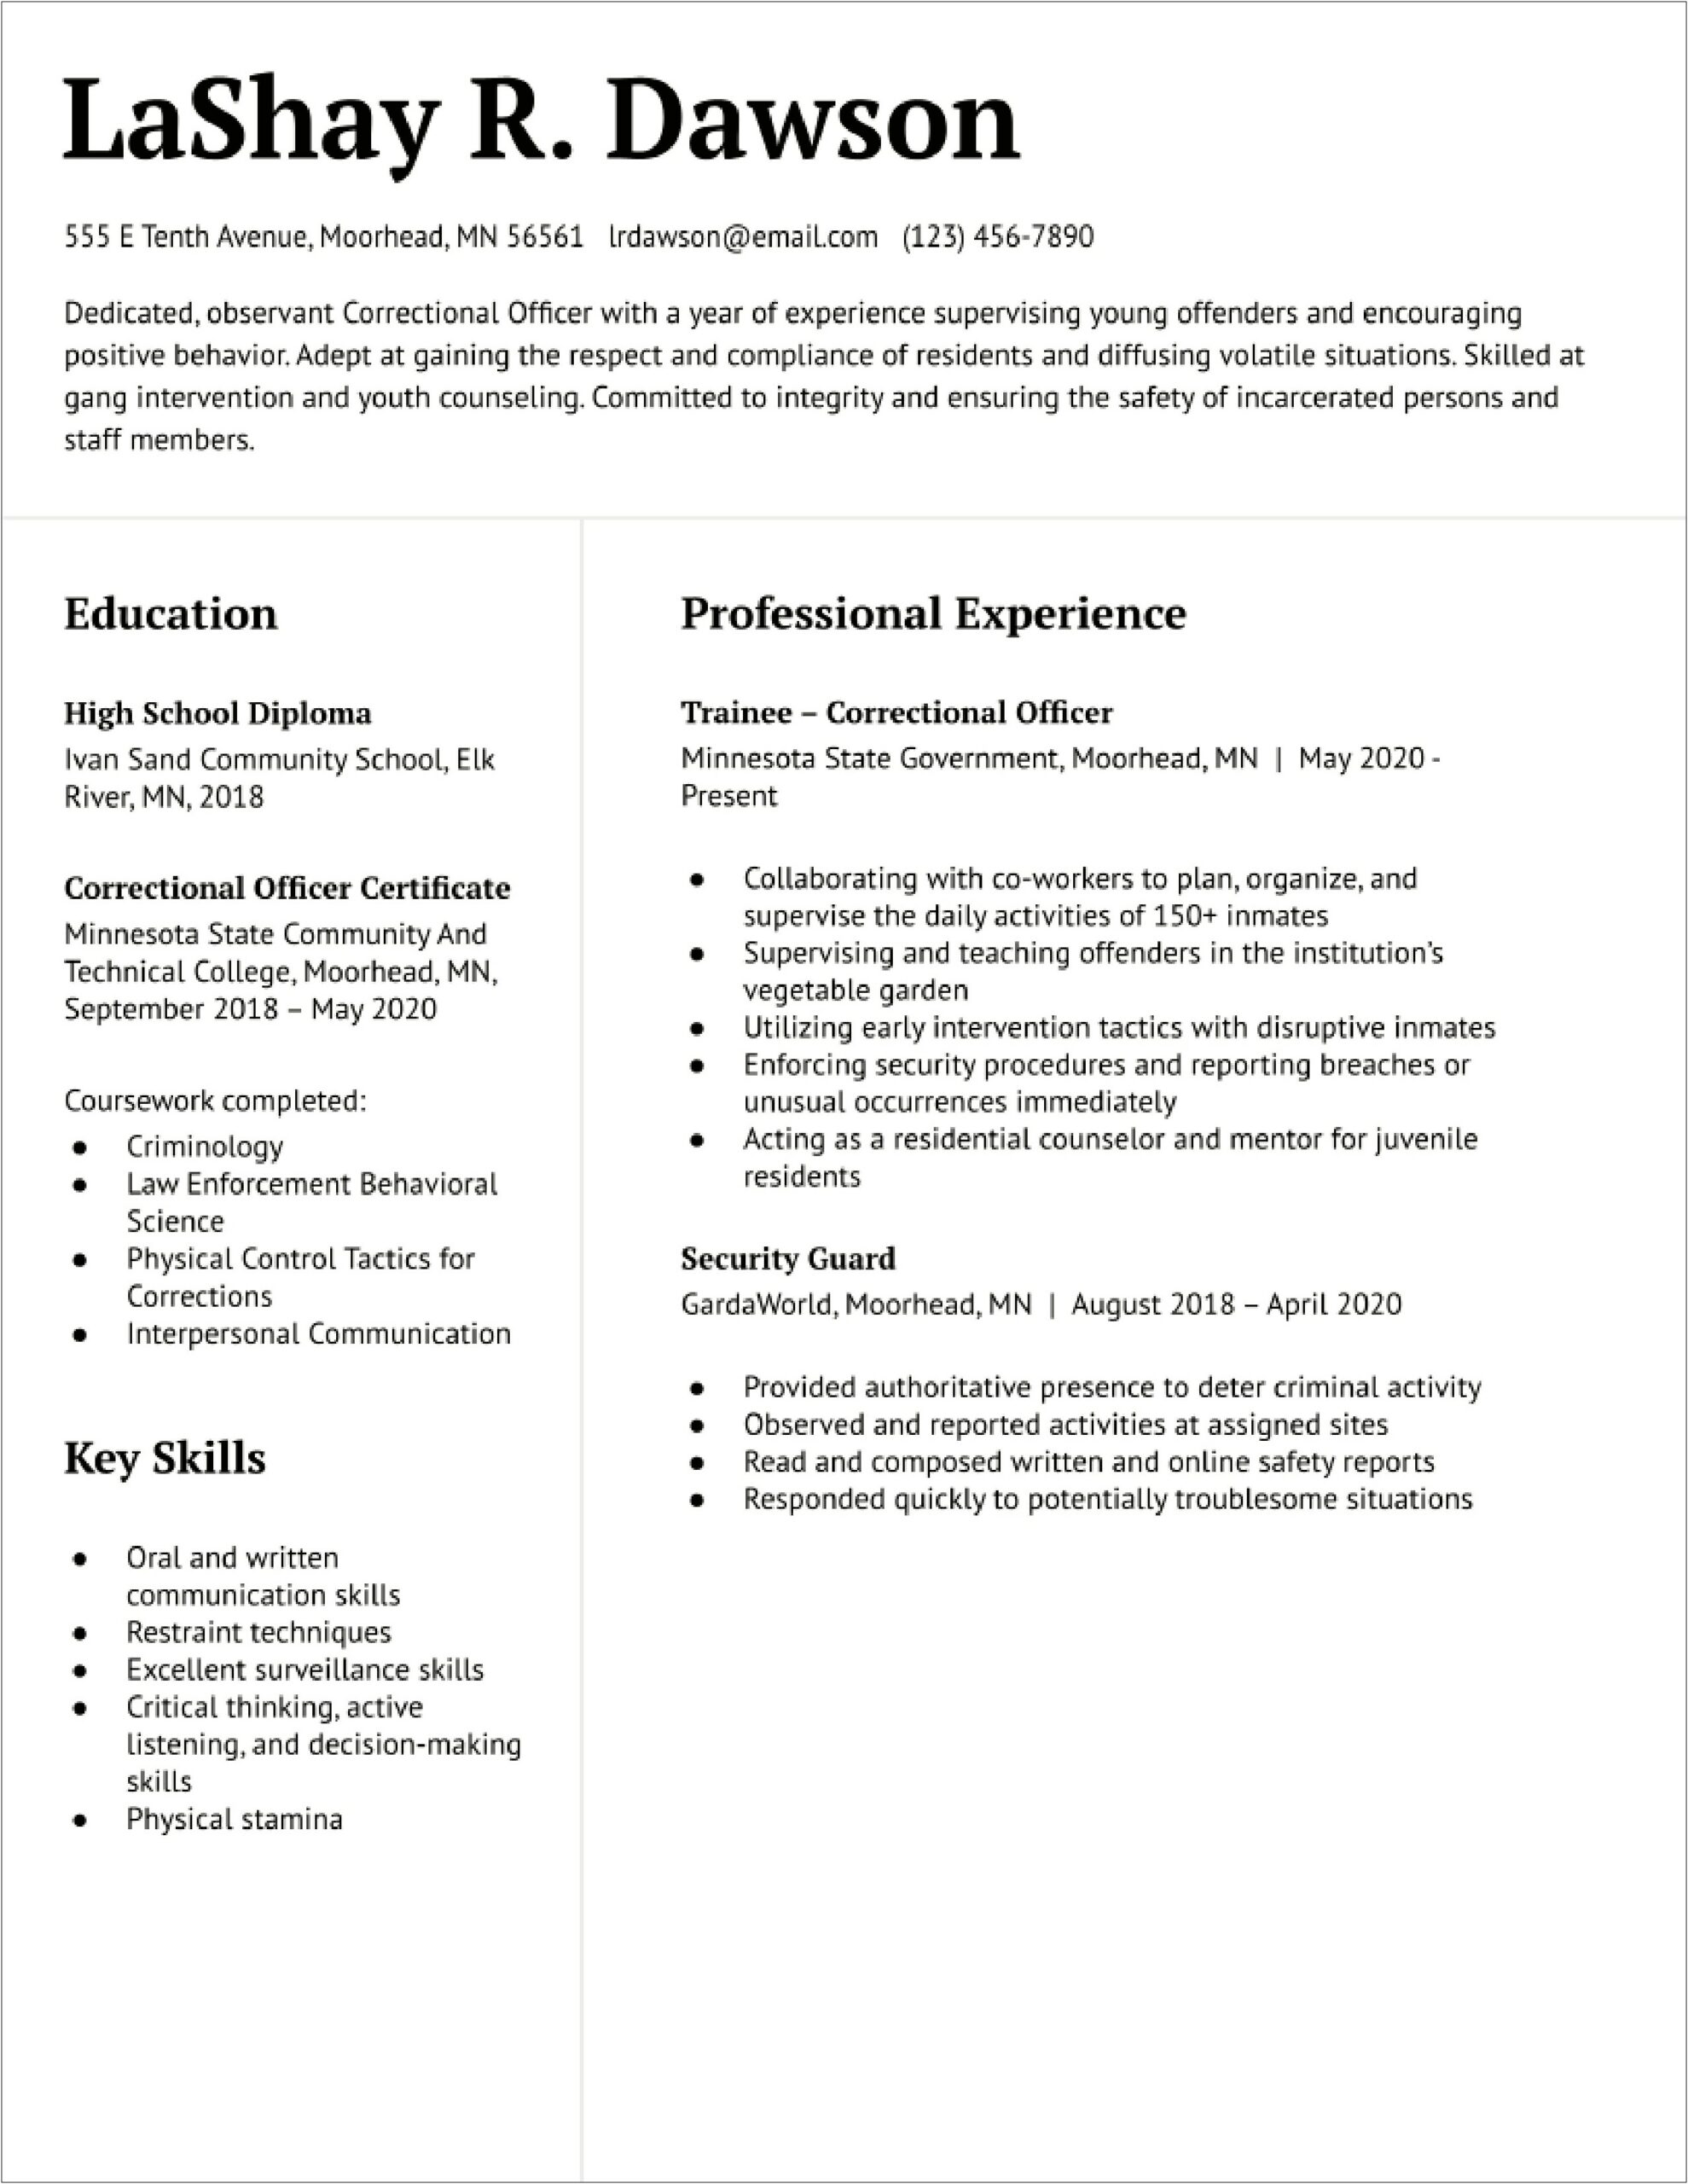 Resume Objective Examples Correctional Officer